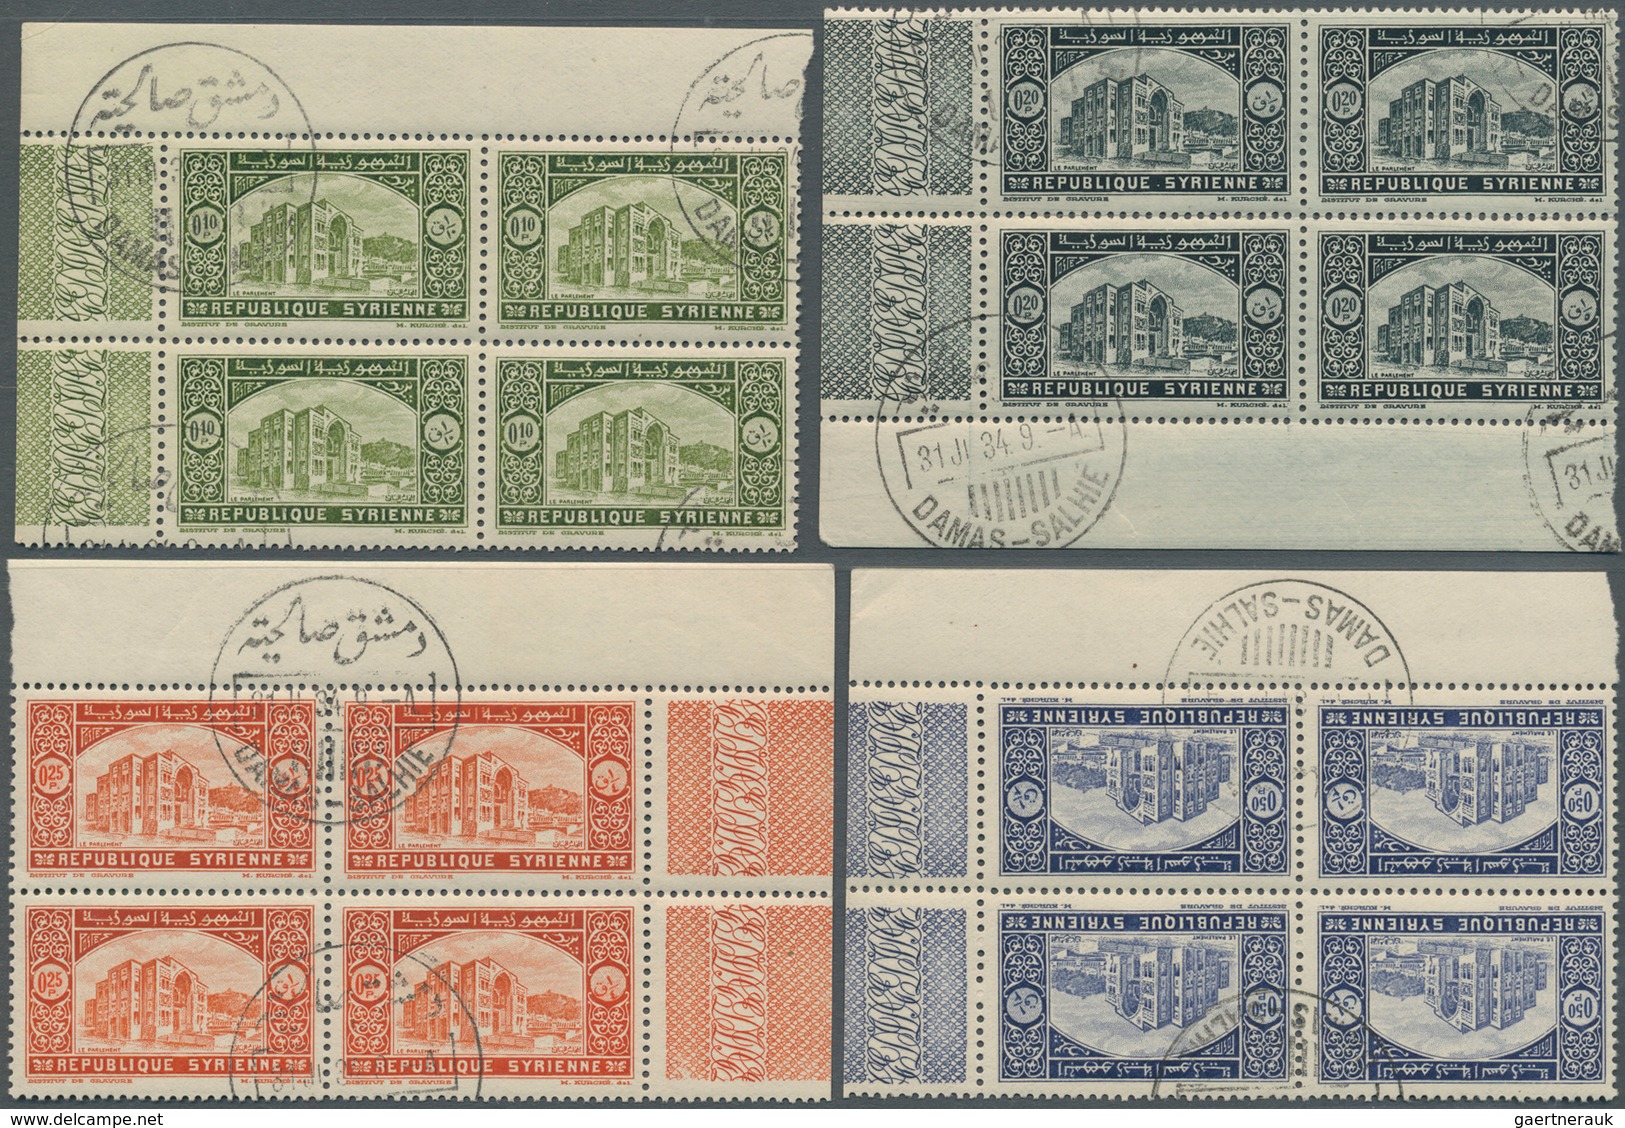 Syrien: 1934, 10th Anniversary of Republic, 0.10pi. to 100pi., complete set of 29 values as marginal